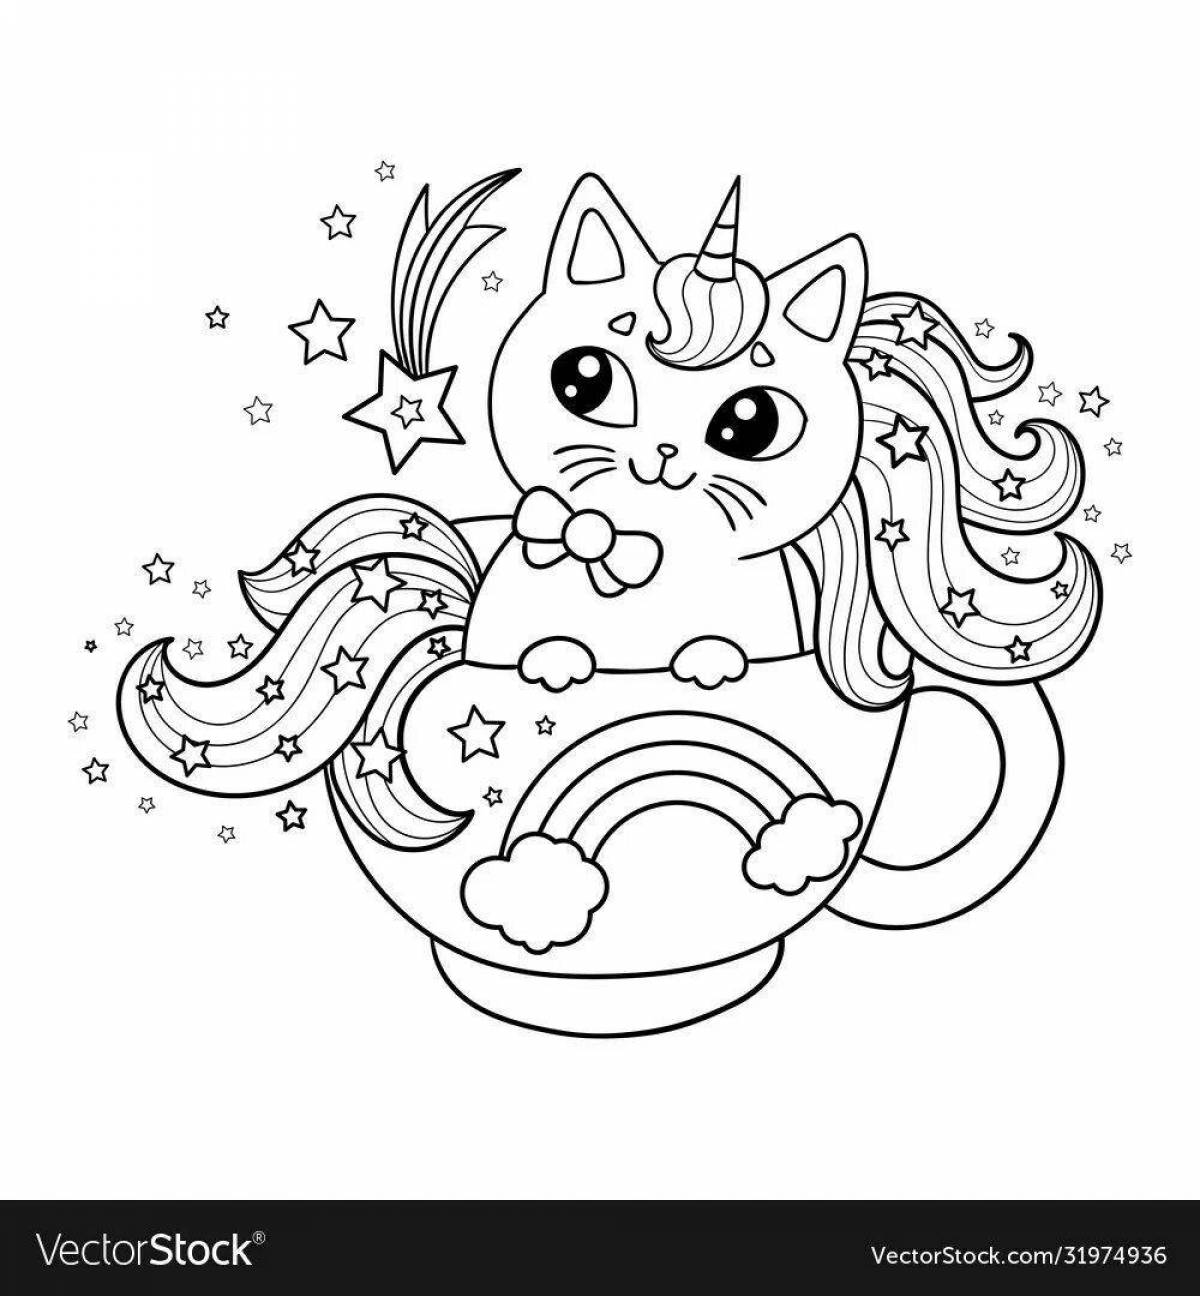 Coloring page quirky kitten in a mug